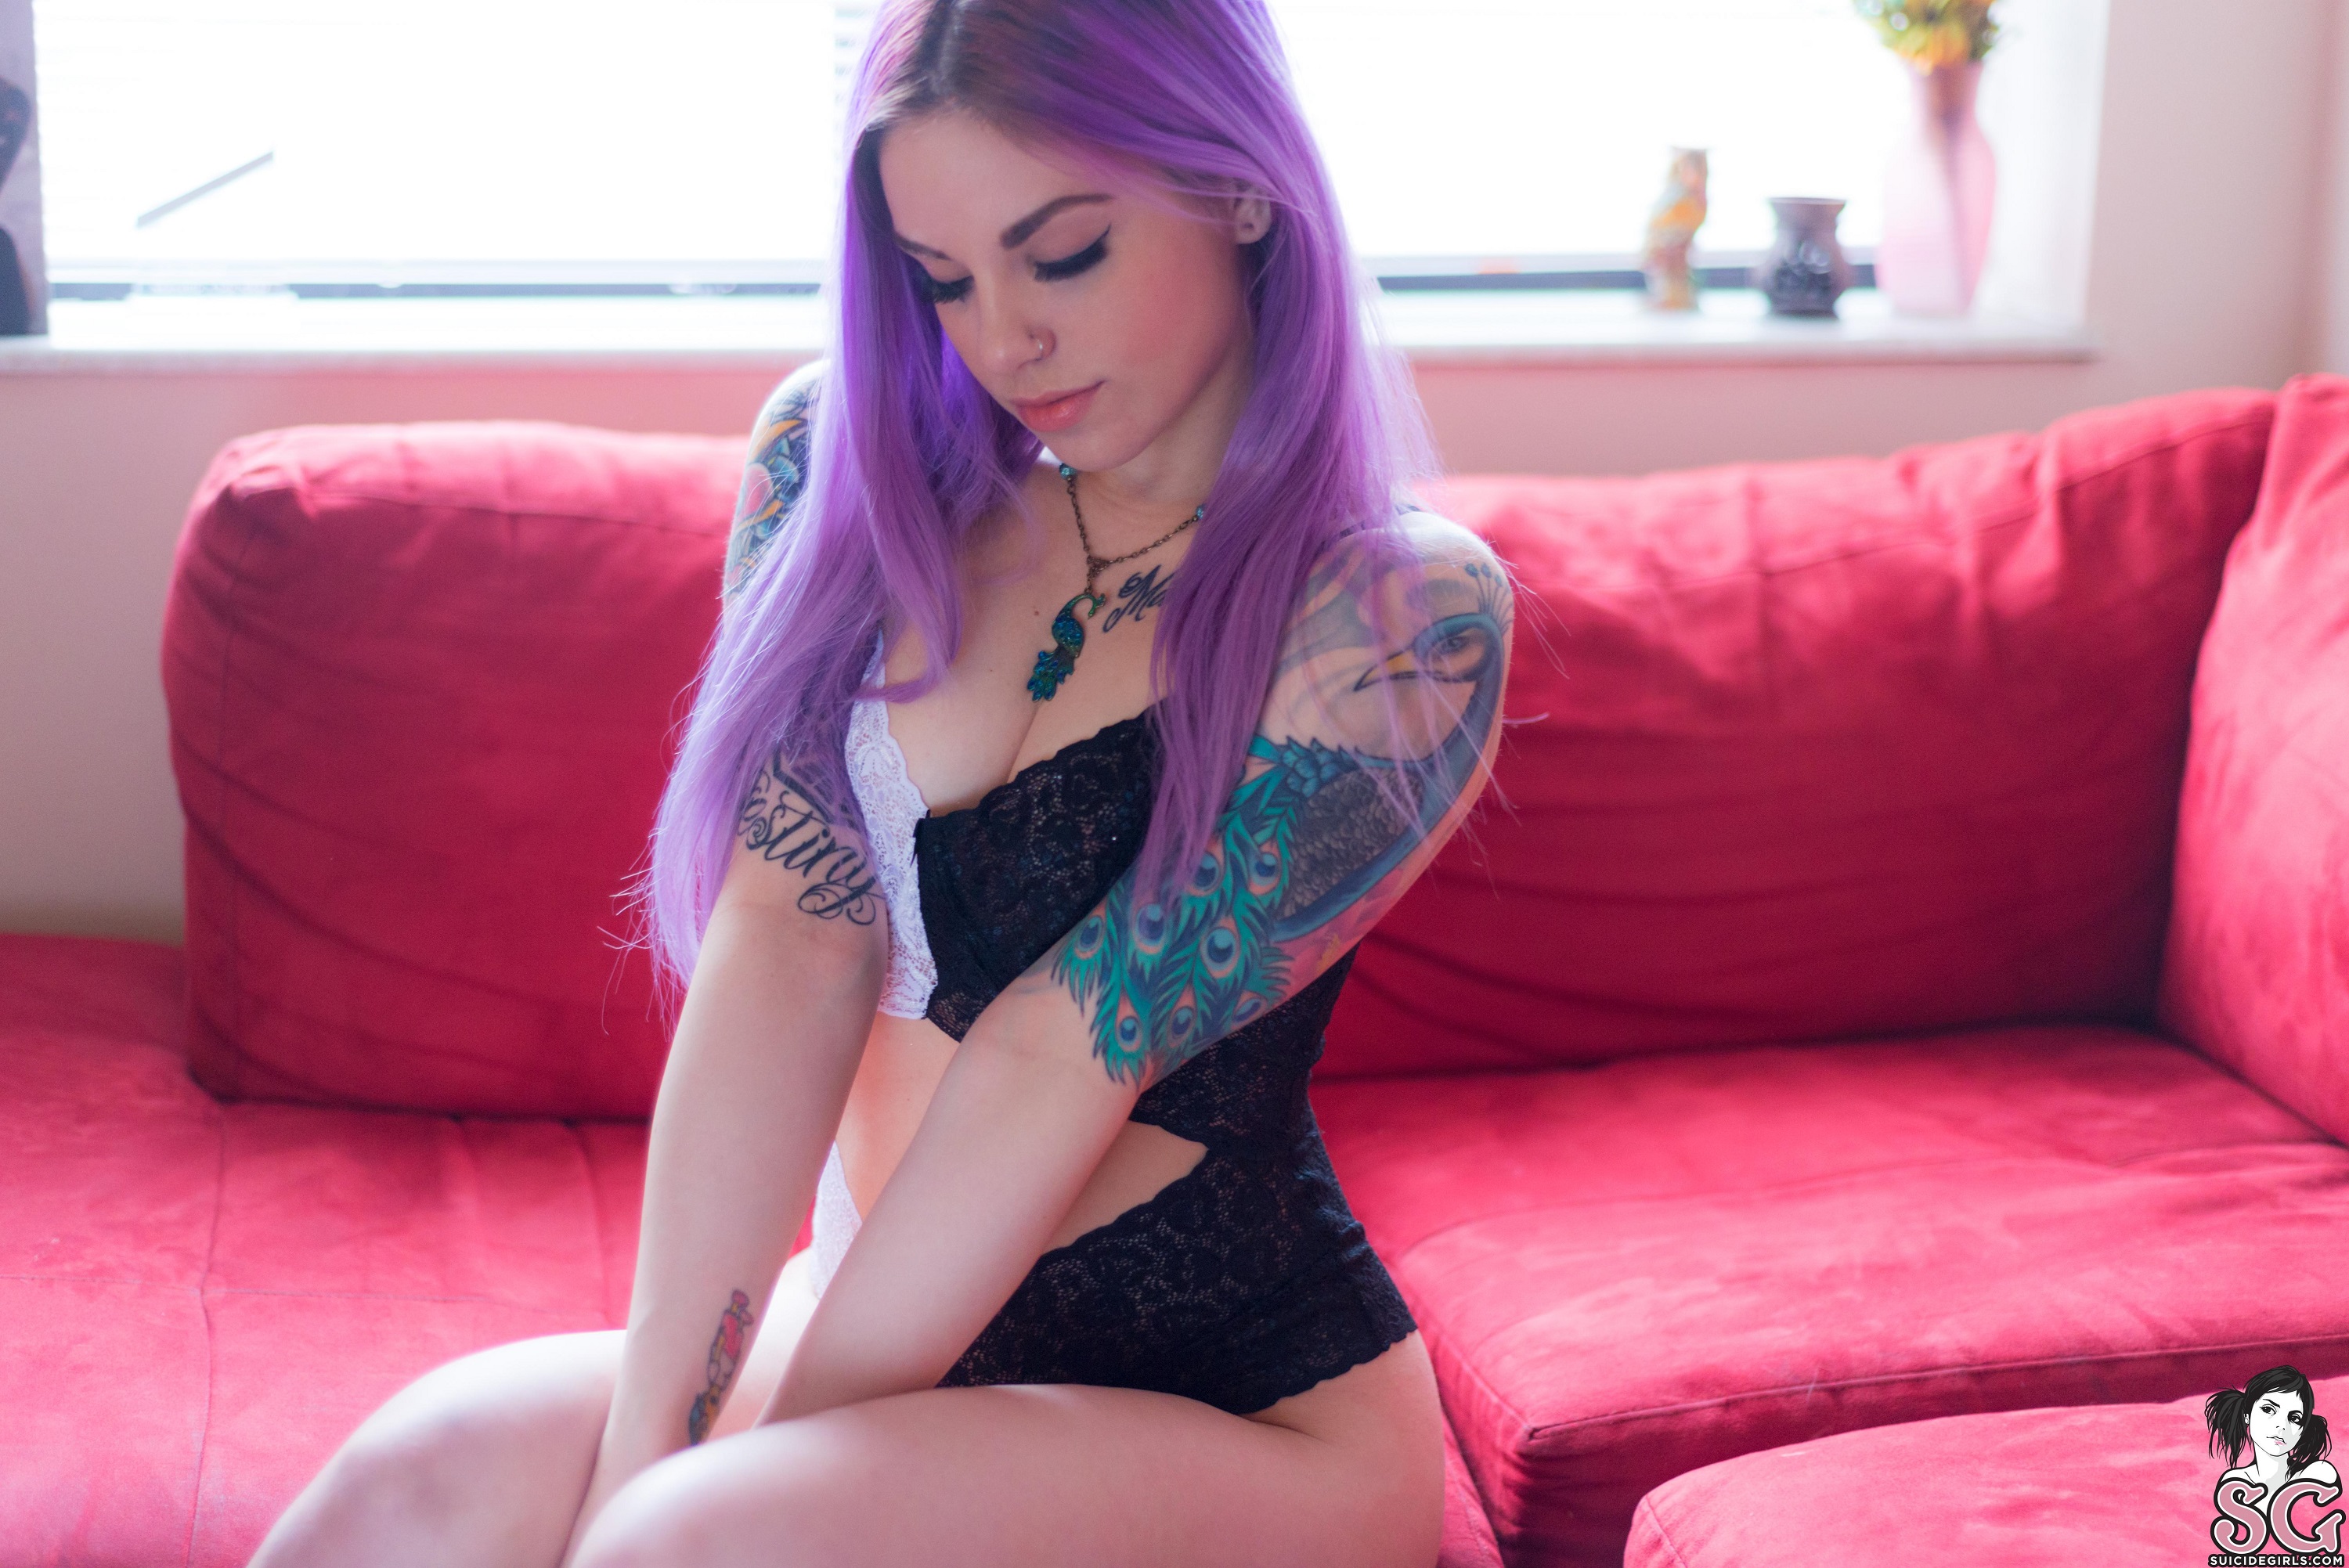 People 3000x2003 Orion Suicide women model dyed hair one-piece-lingerie lingerie bodysuit nose ring necklace cleavage sitting blinds couch inked girls tattoo indoors Suicide Girls